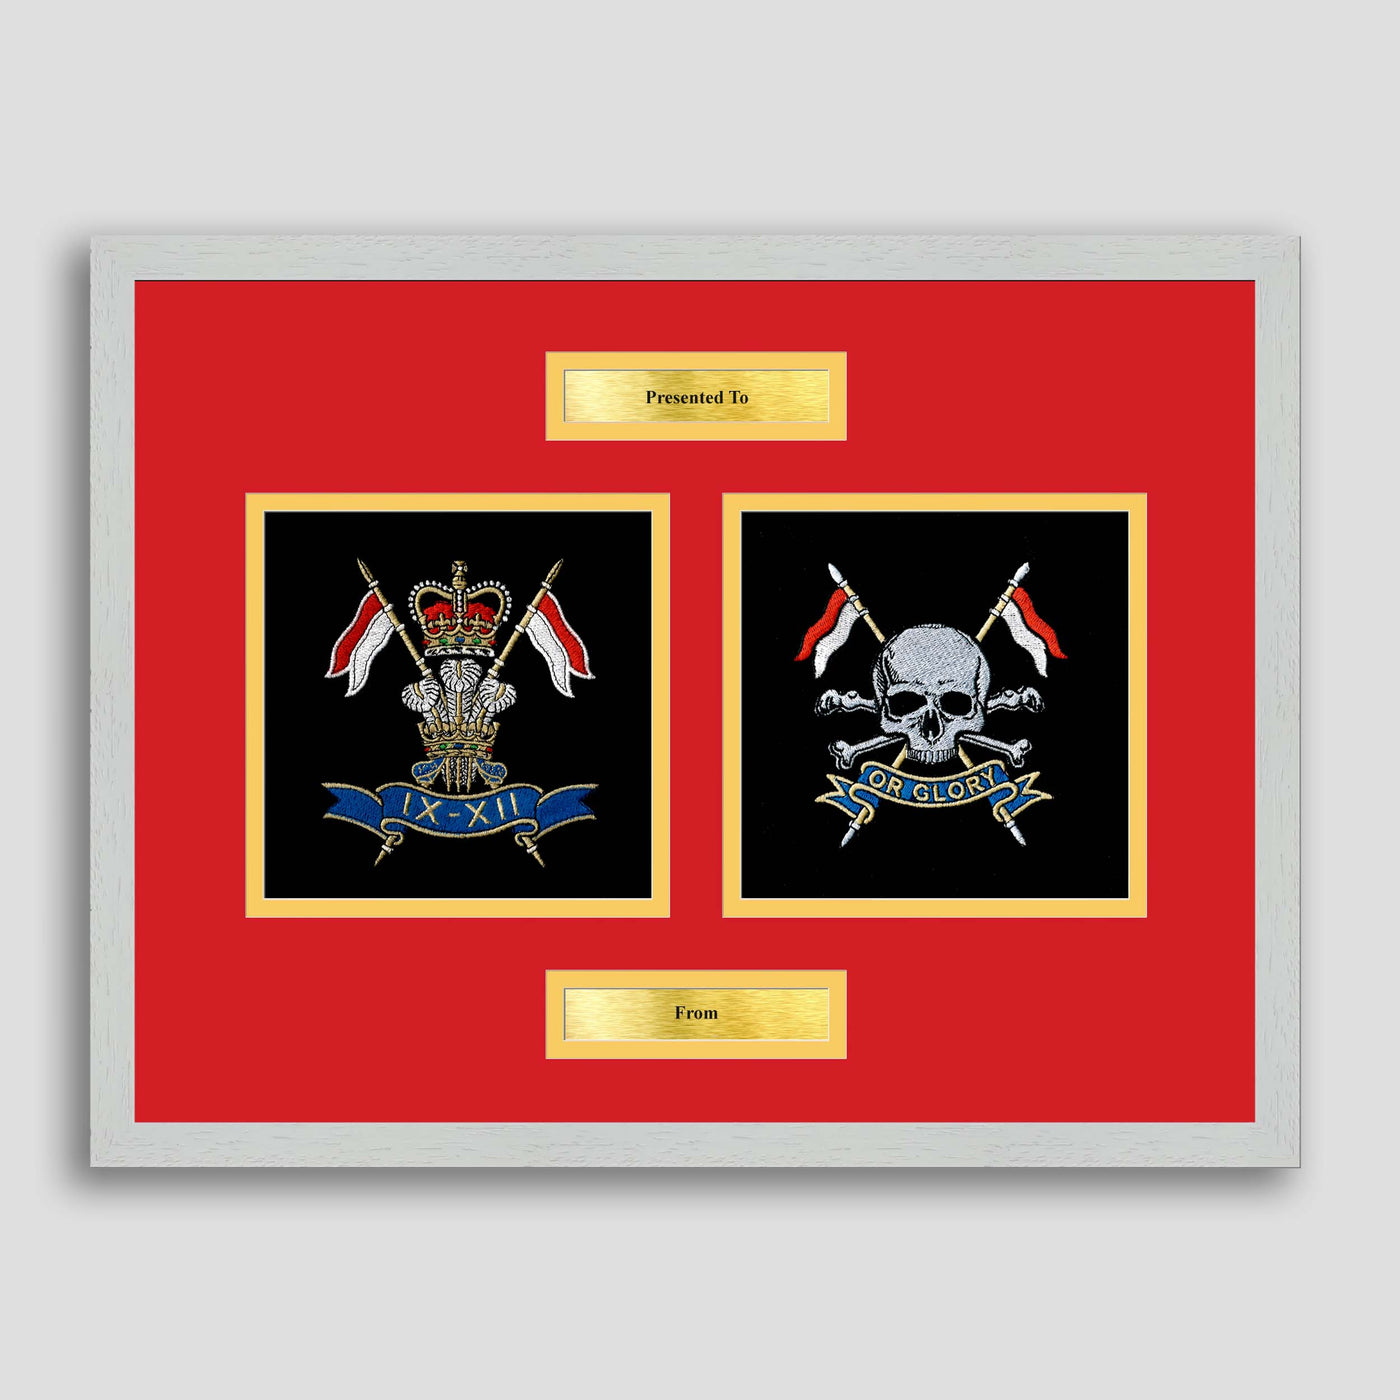 9th/12th Lancers & The Royal Lancers Framed Military Embroidery Presentation